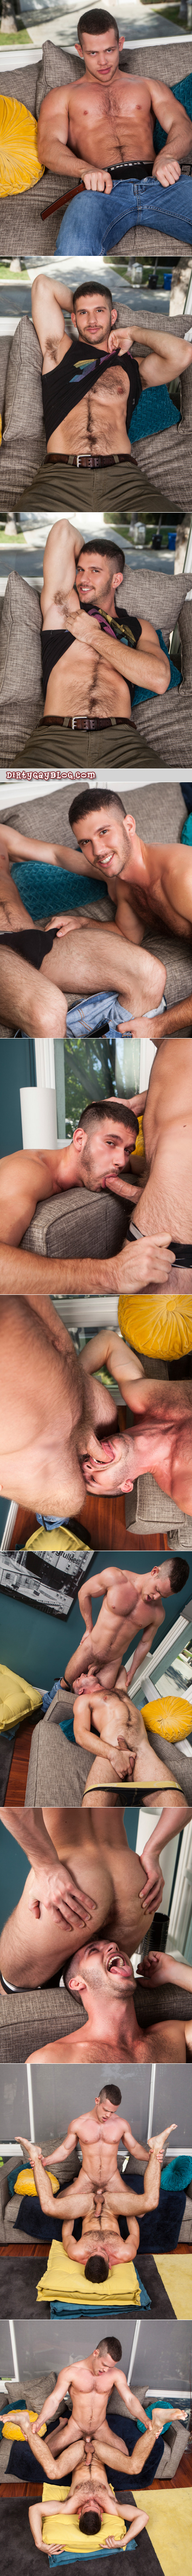 Hairy bottom proves to be an expert at taking cock from his muscular male friend.